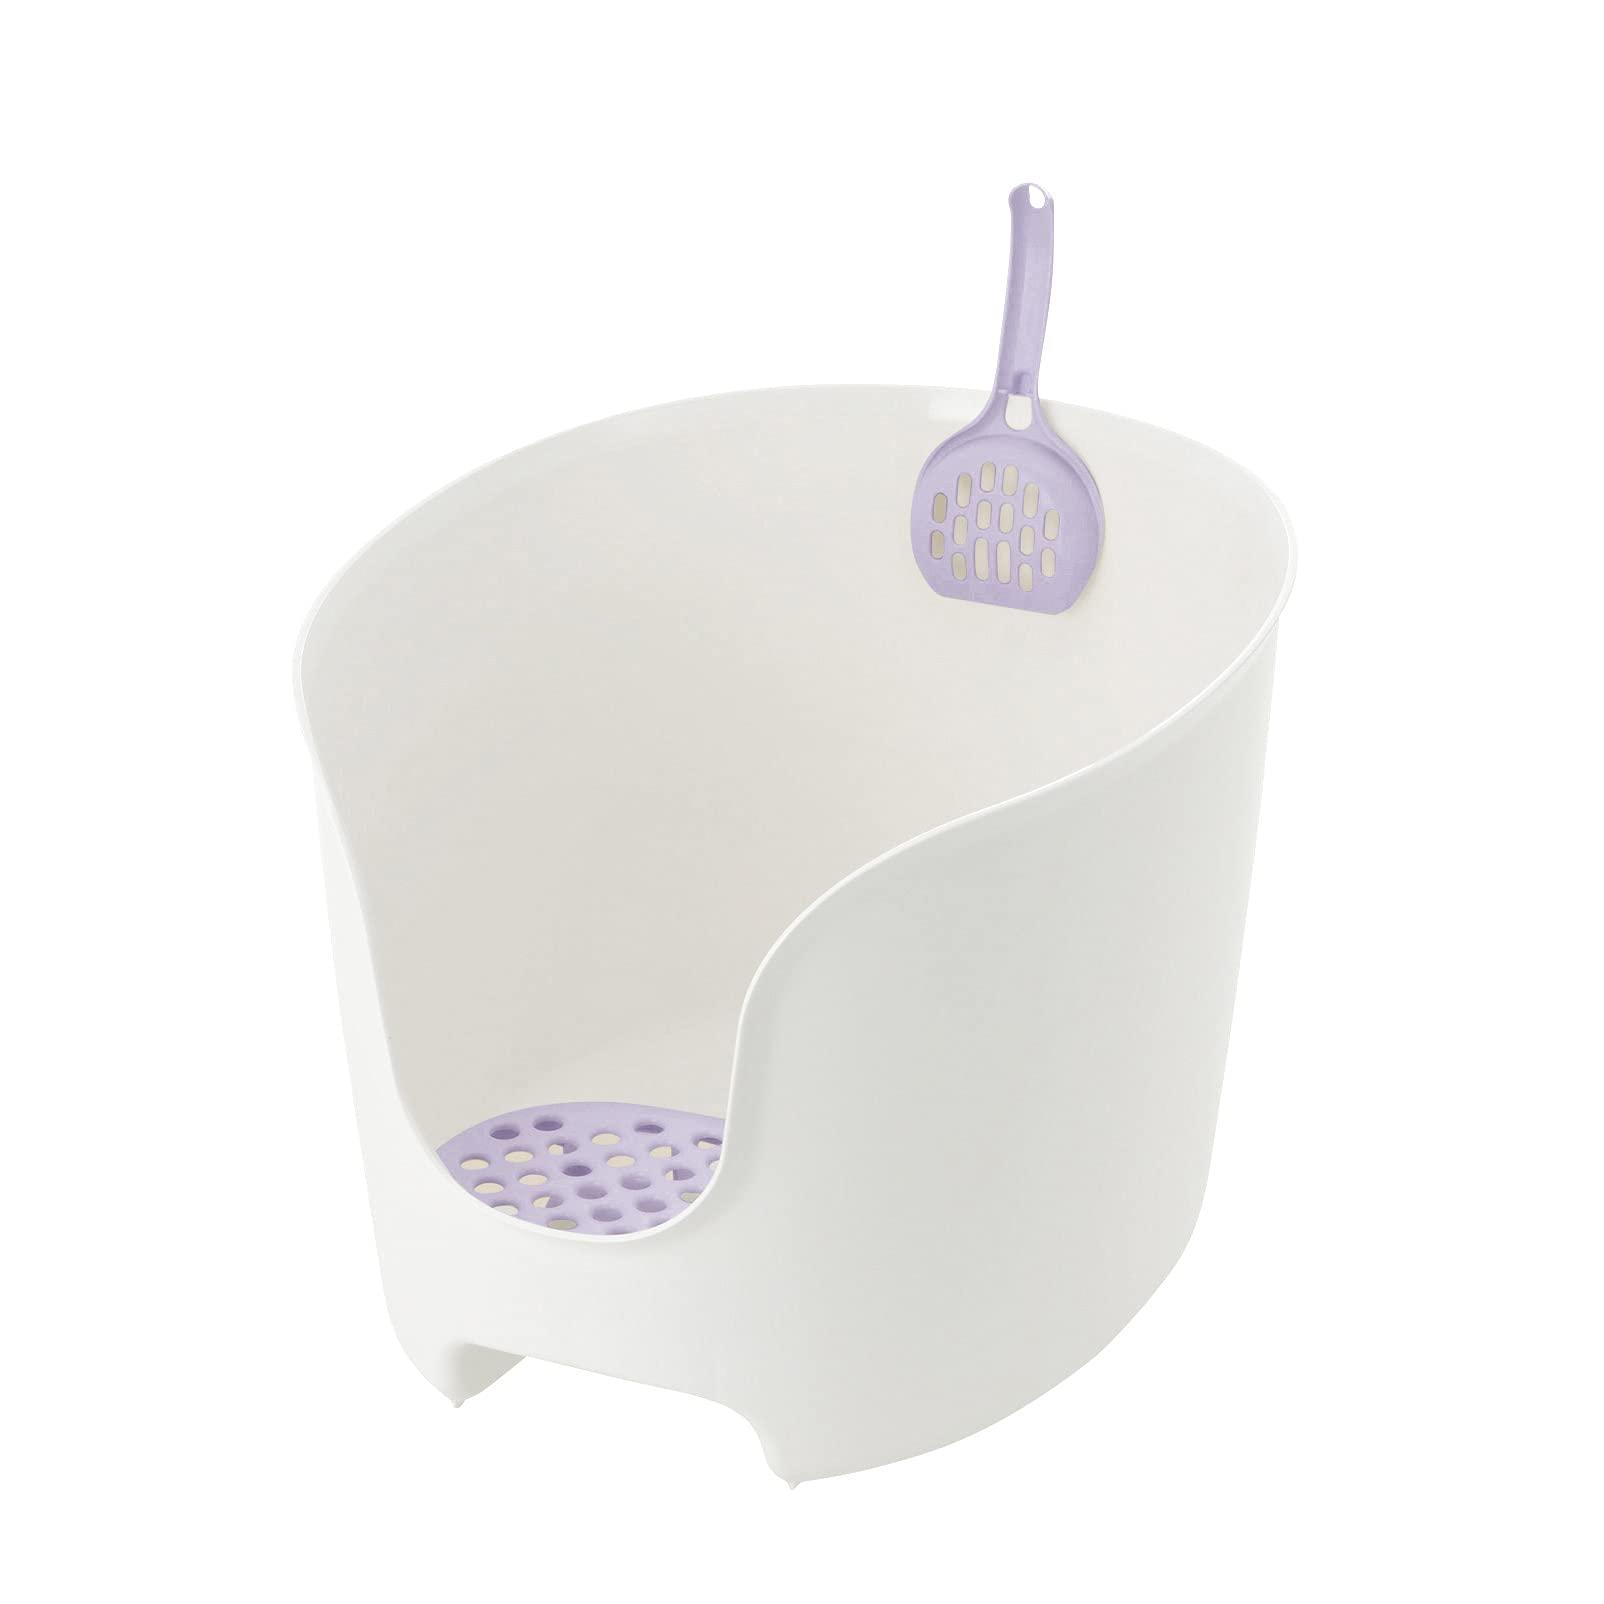 Richell PAW TRAX High Wall Cat Litter Box in White/Lavender, High Sides Cat Litter Box with Scoop